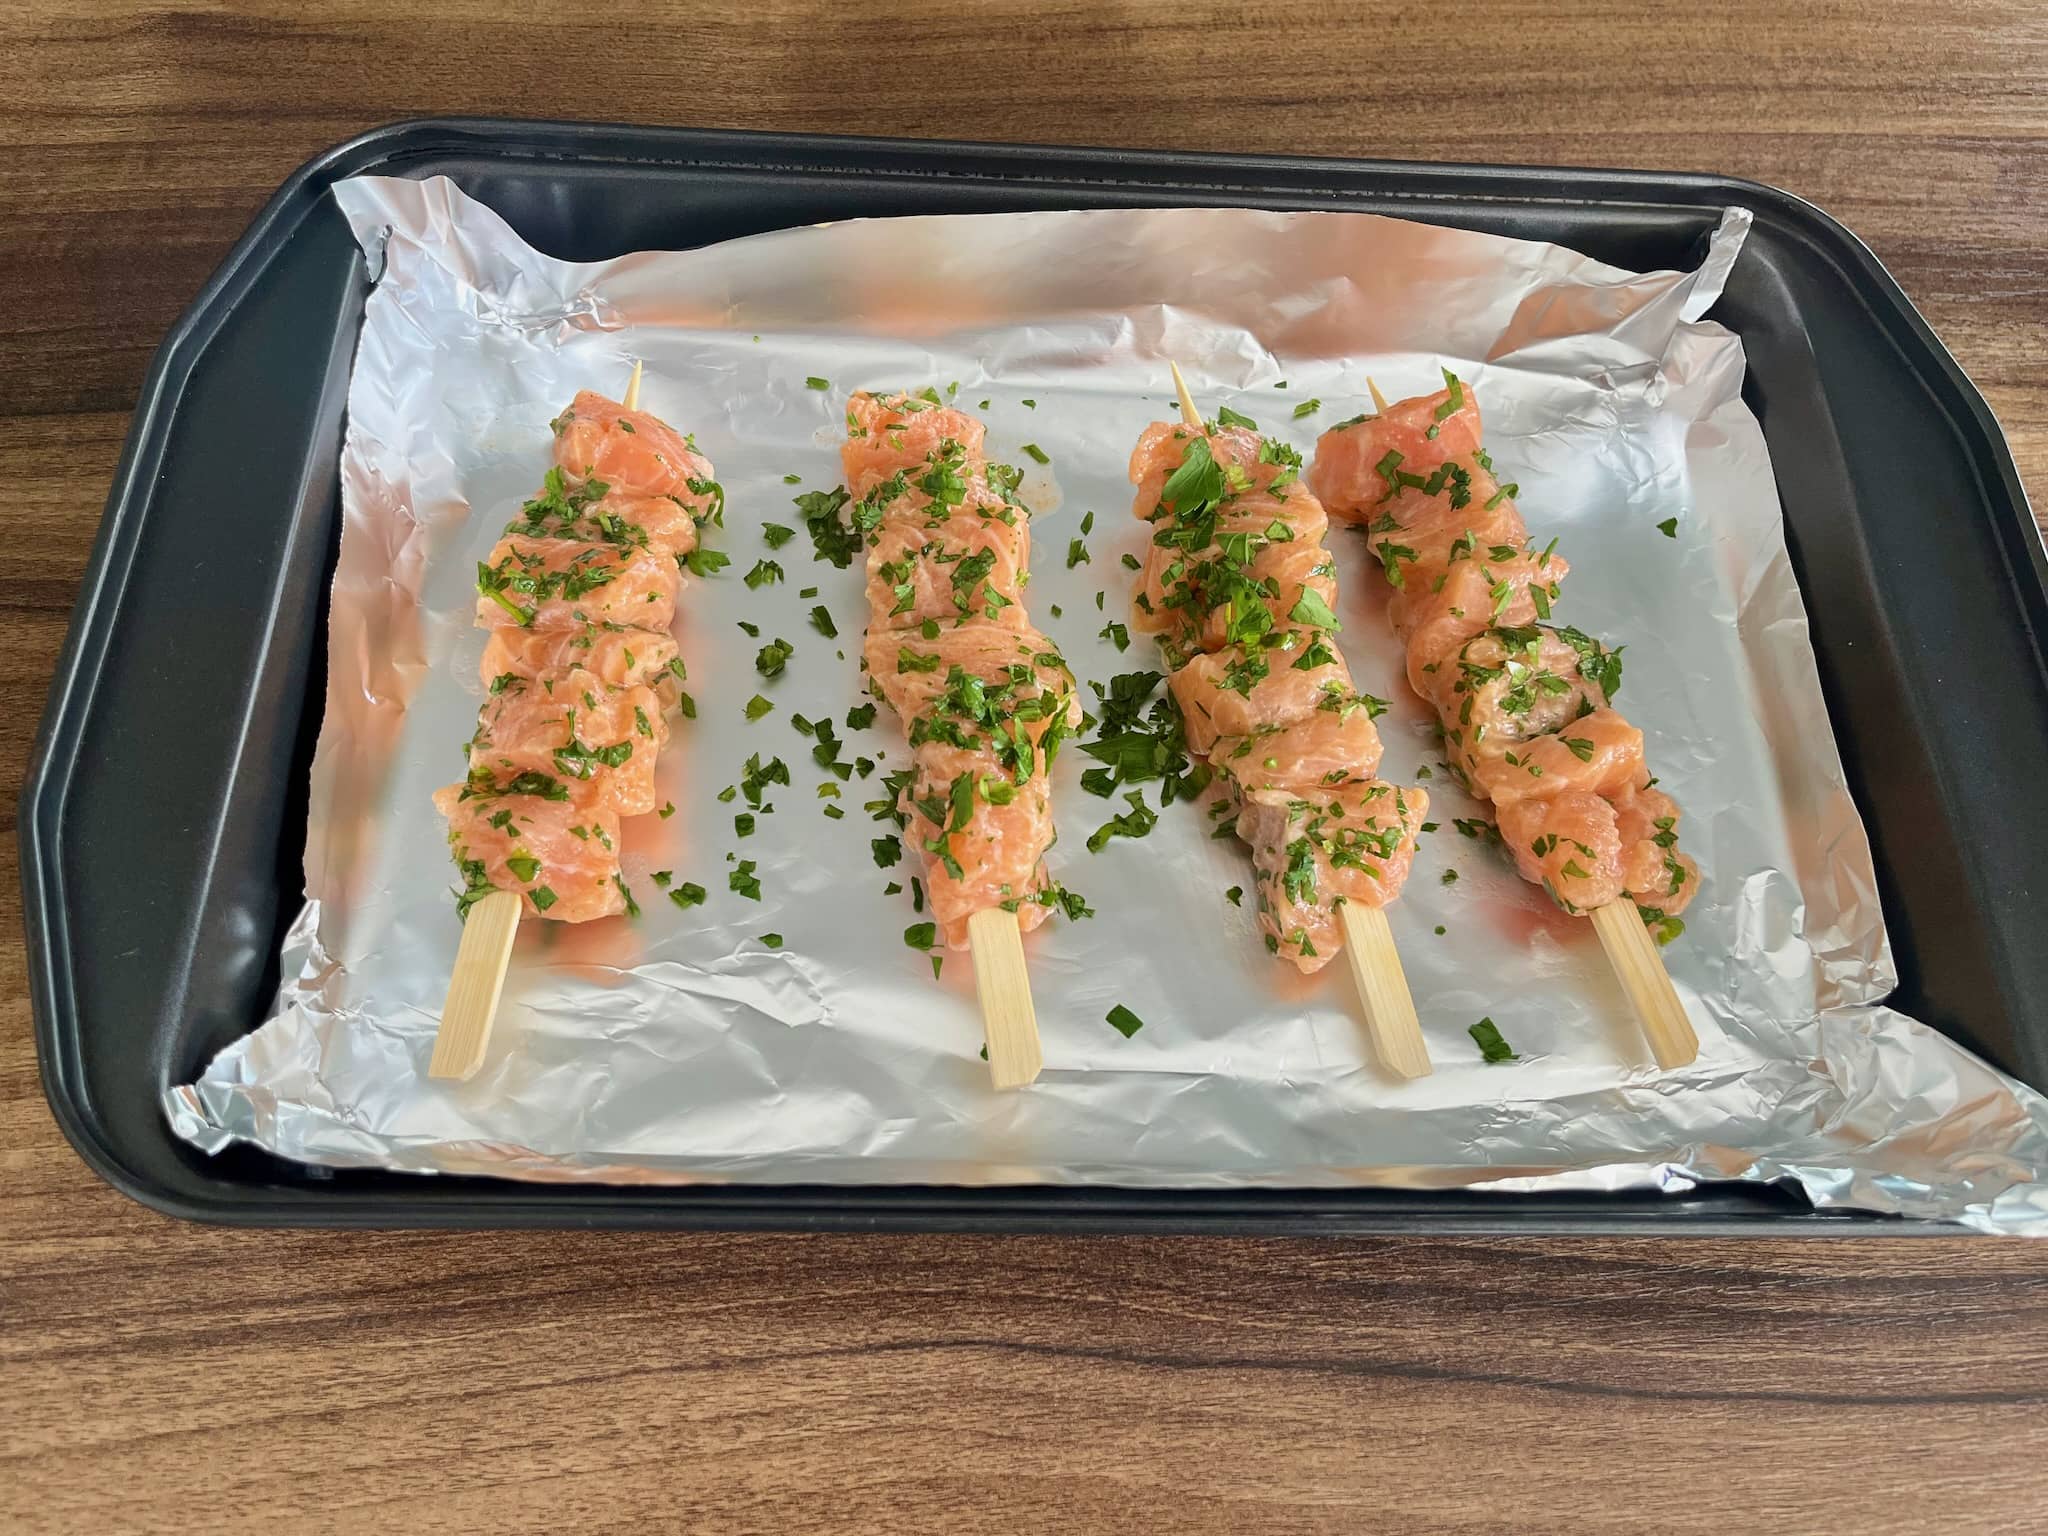 Salmon cubes impaled on skewers on a baking tray